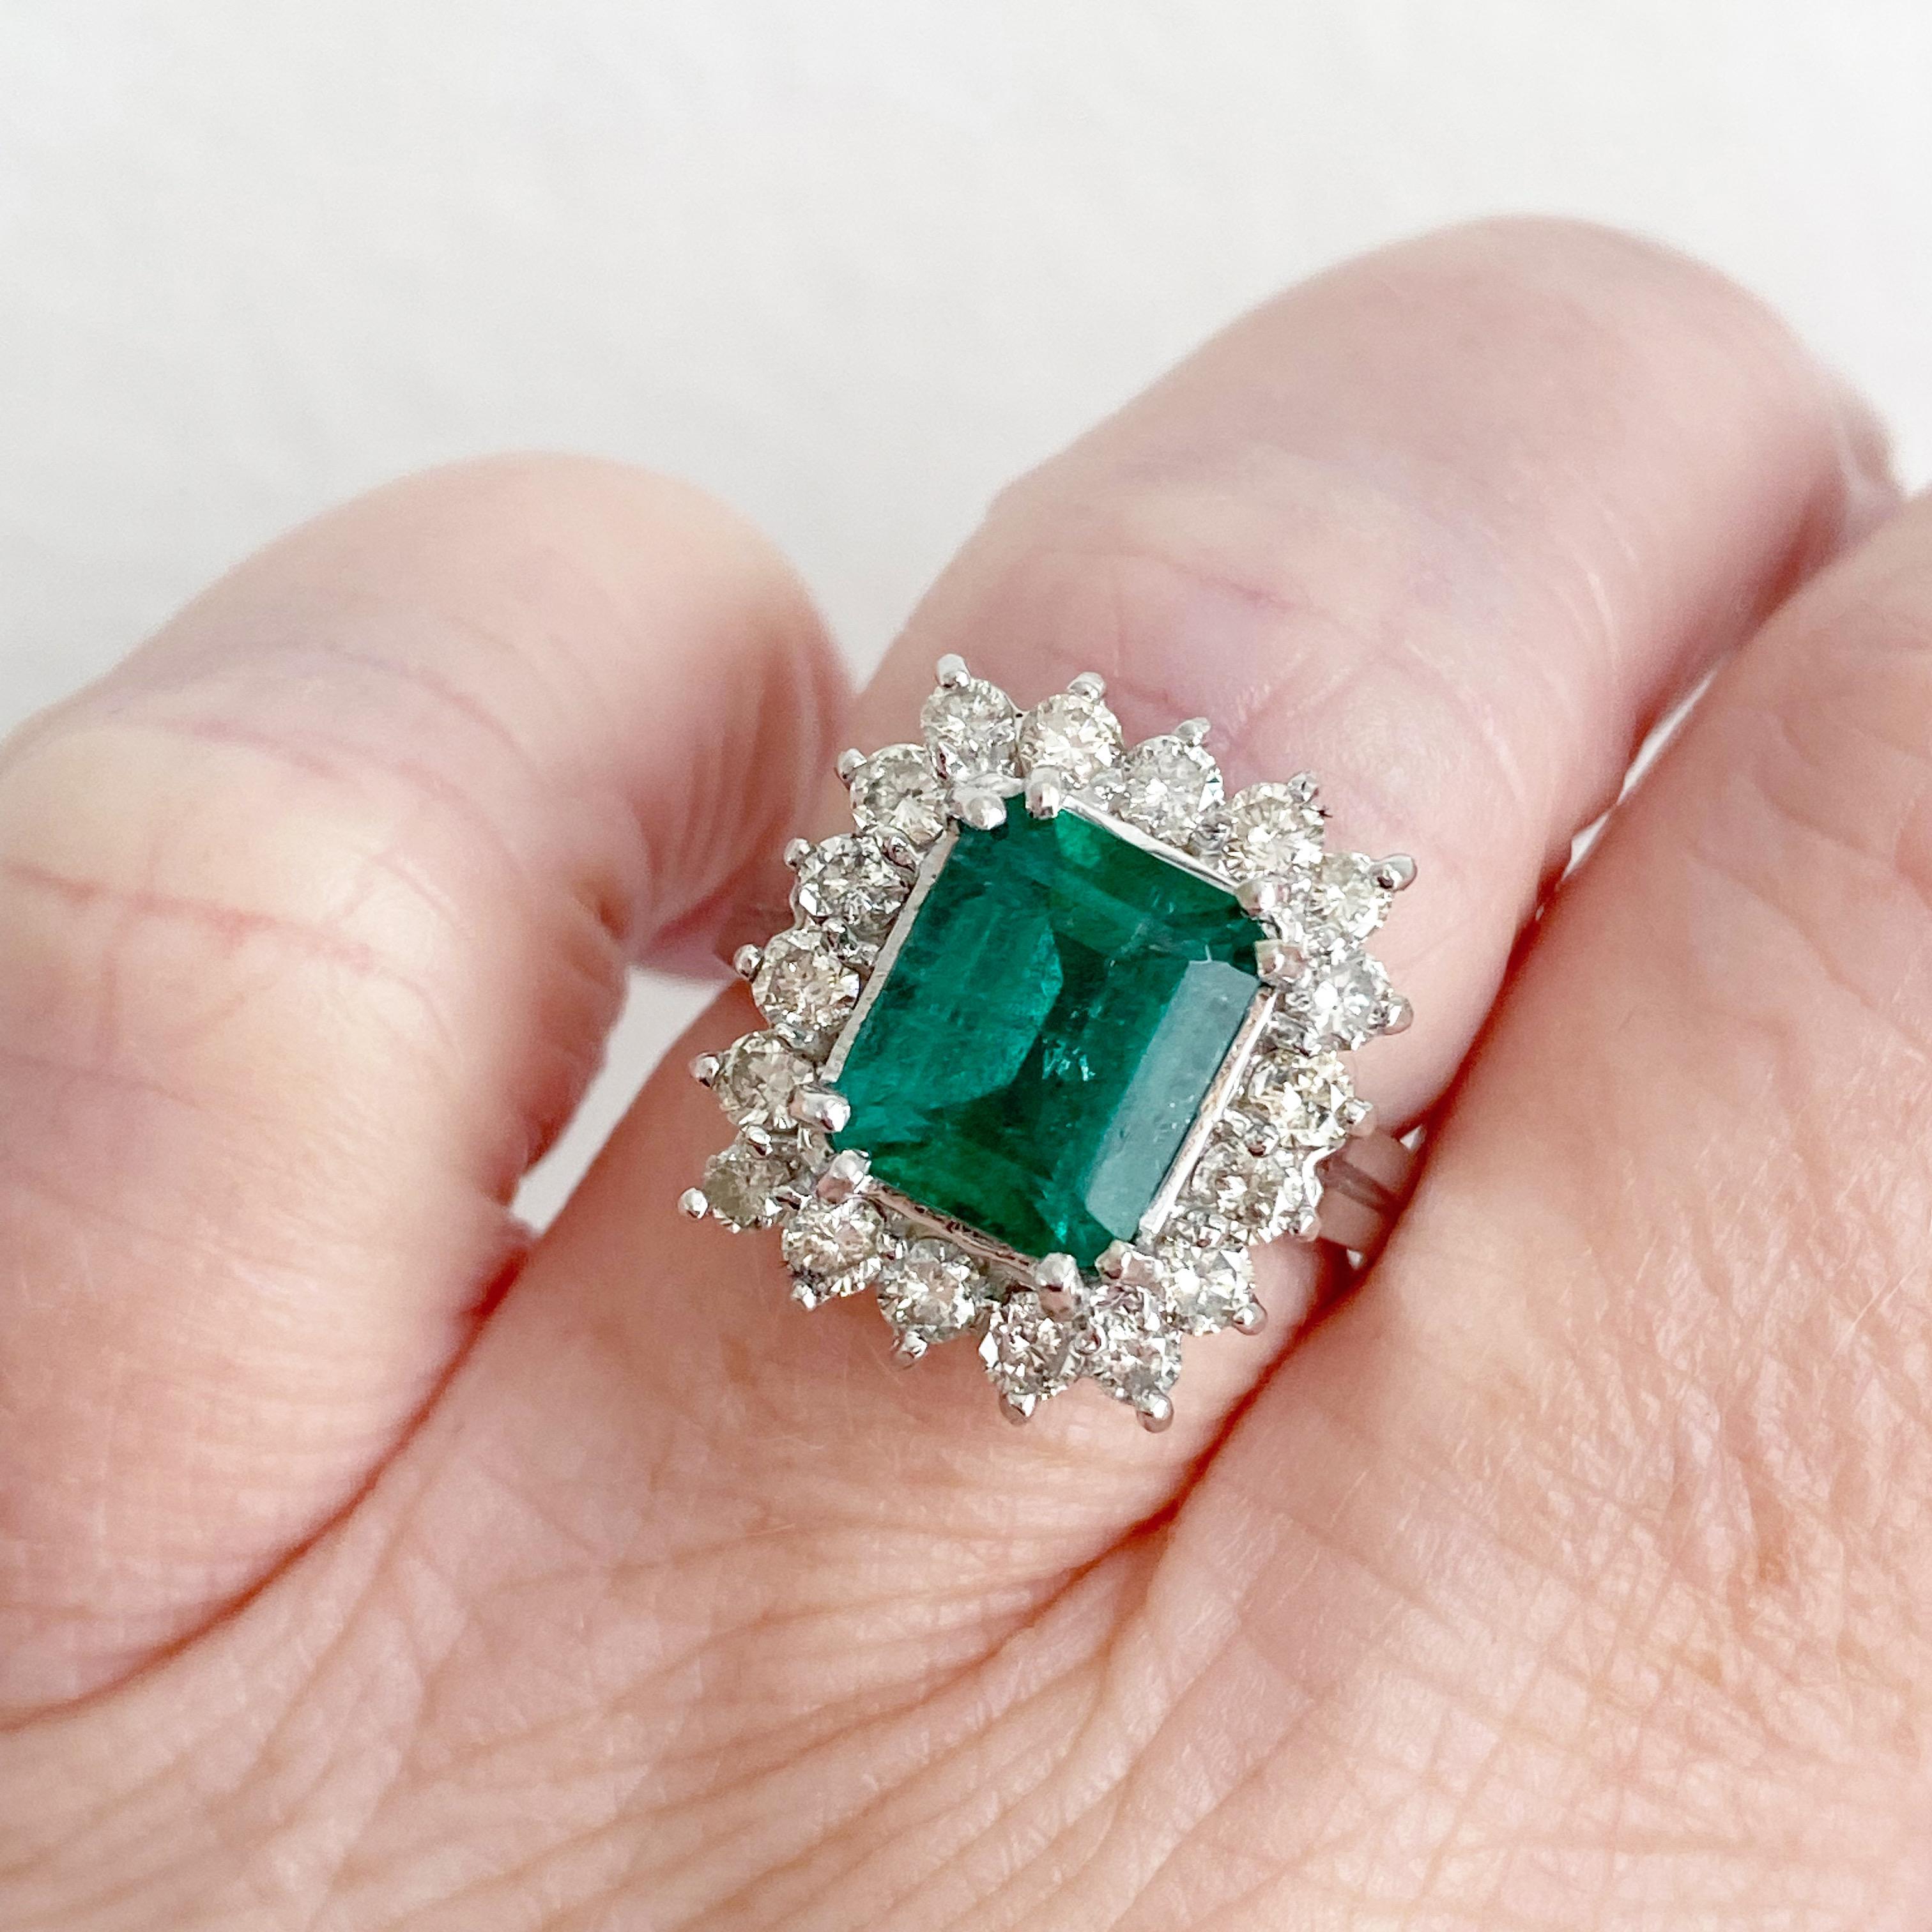 Emerald Cut Beautiful Vintage 14k White Gold Emerald and Diamond Halo Ring with AGL Cert